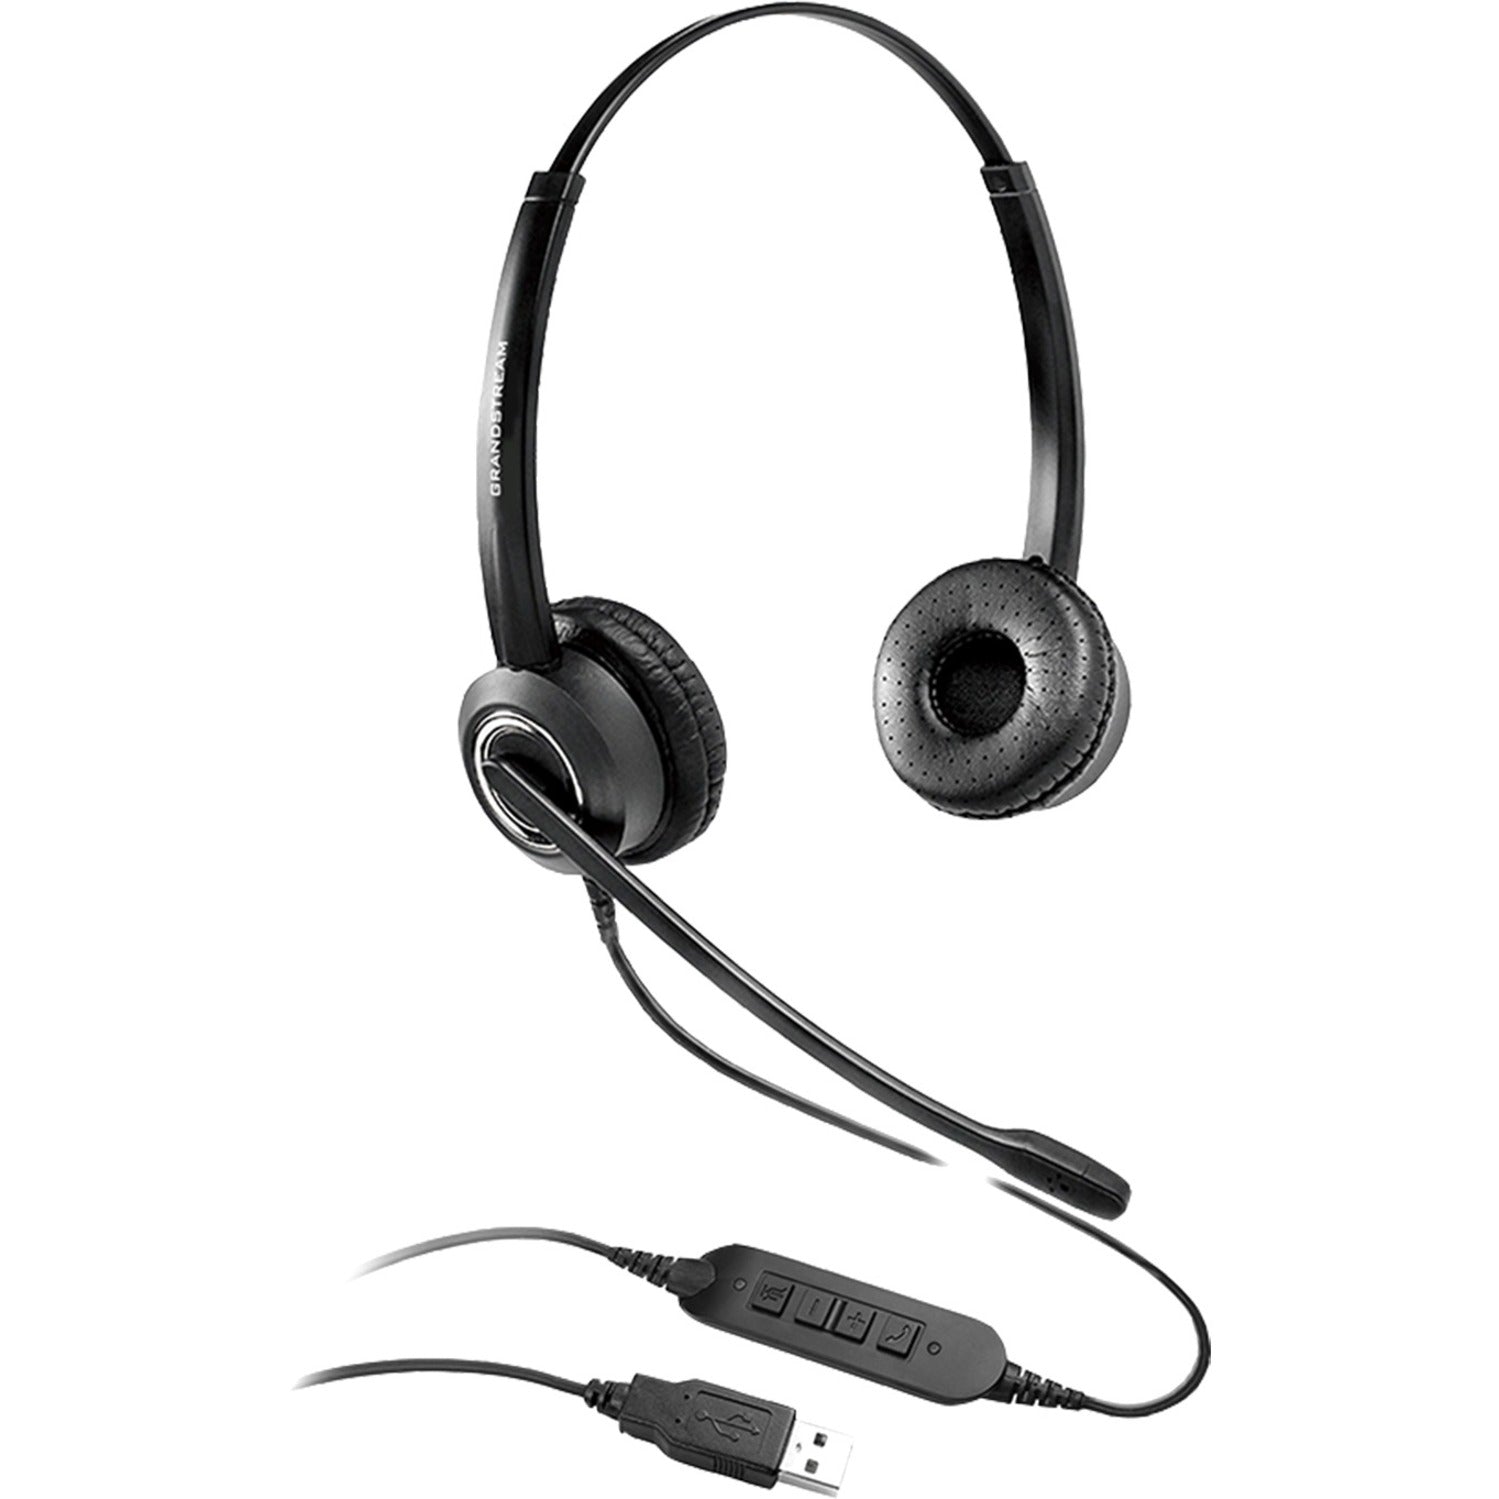 Grandstream GUV3000 Headset, Comfortable, Noise Cancelling, USB Type A